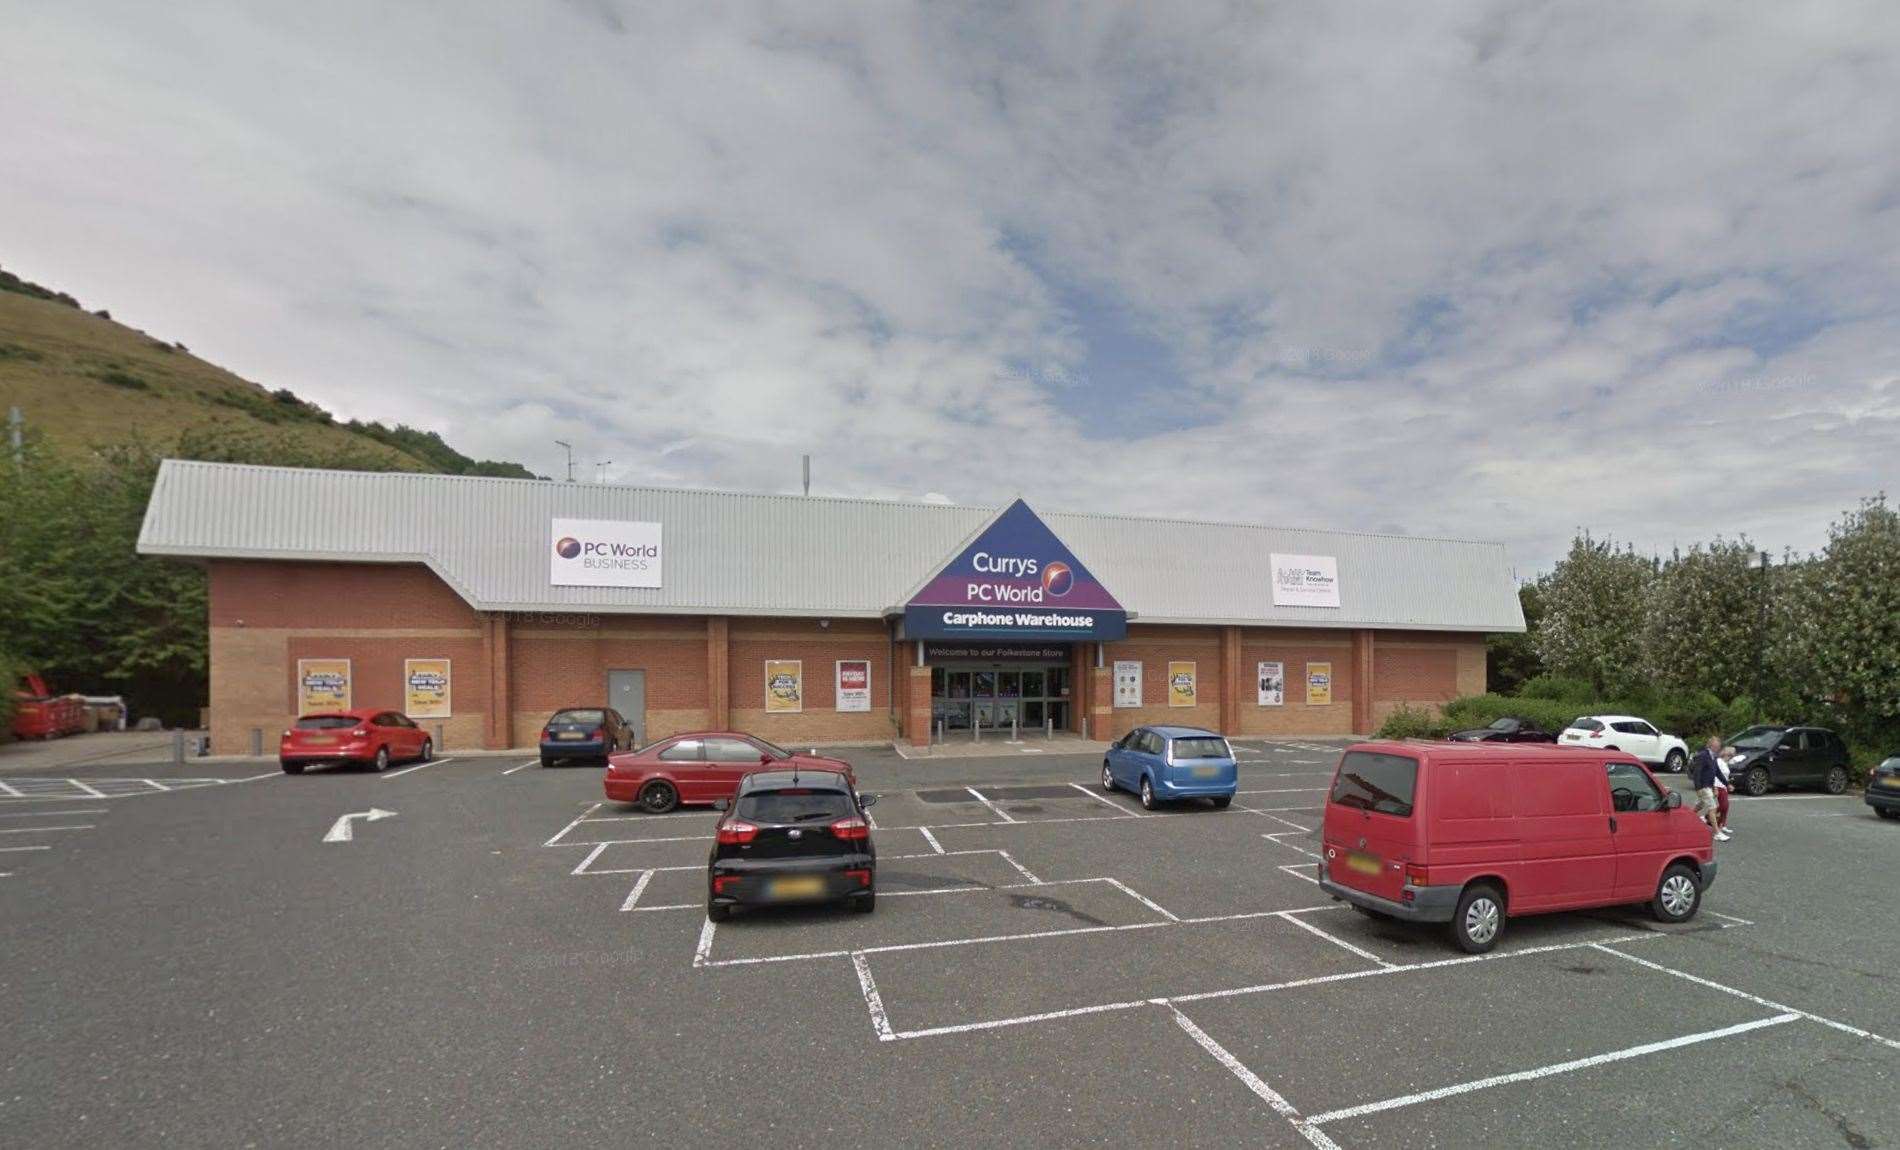 The sexual attack took place in the car park of Currys in Folkestone. Picture: Google Maps